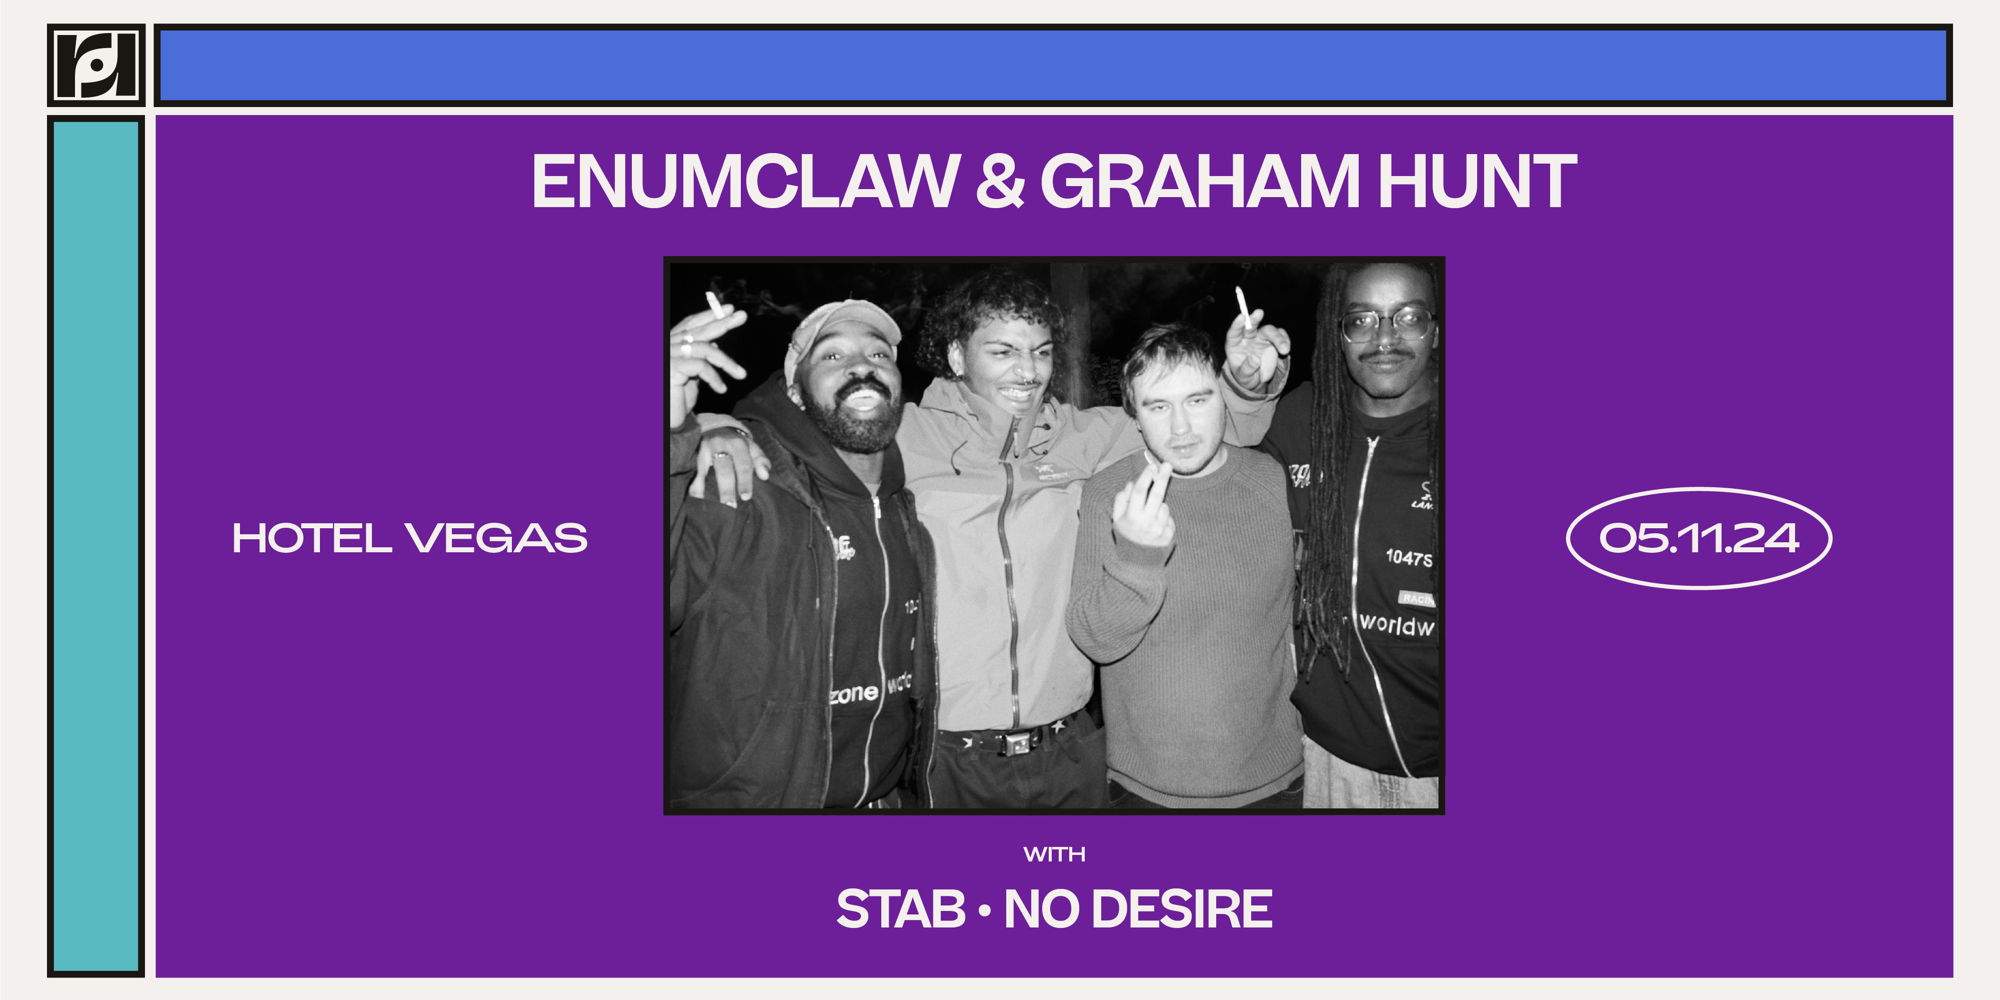 Resound Presents: Enumclaw & Graham Hunt w/ Stab and No Desire at Hotel Vegas promotional image